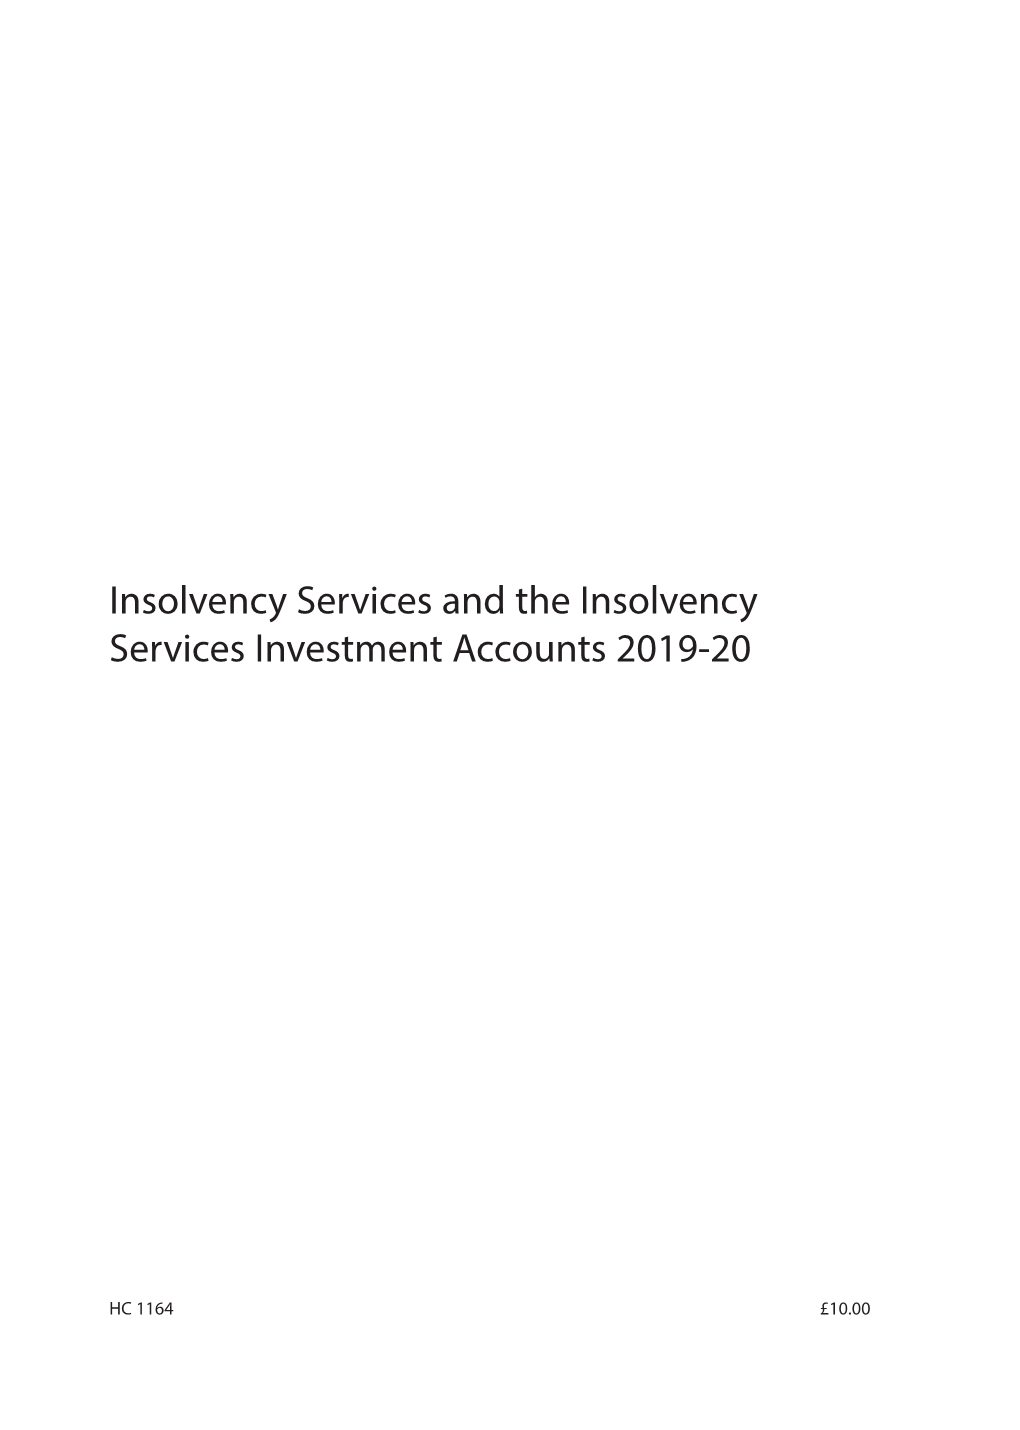 Insolvency Services Accounts 2019-20.Indd